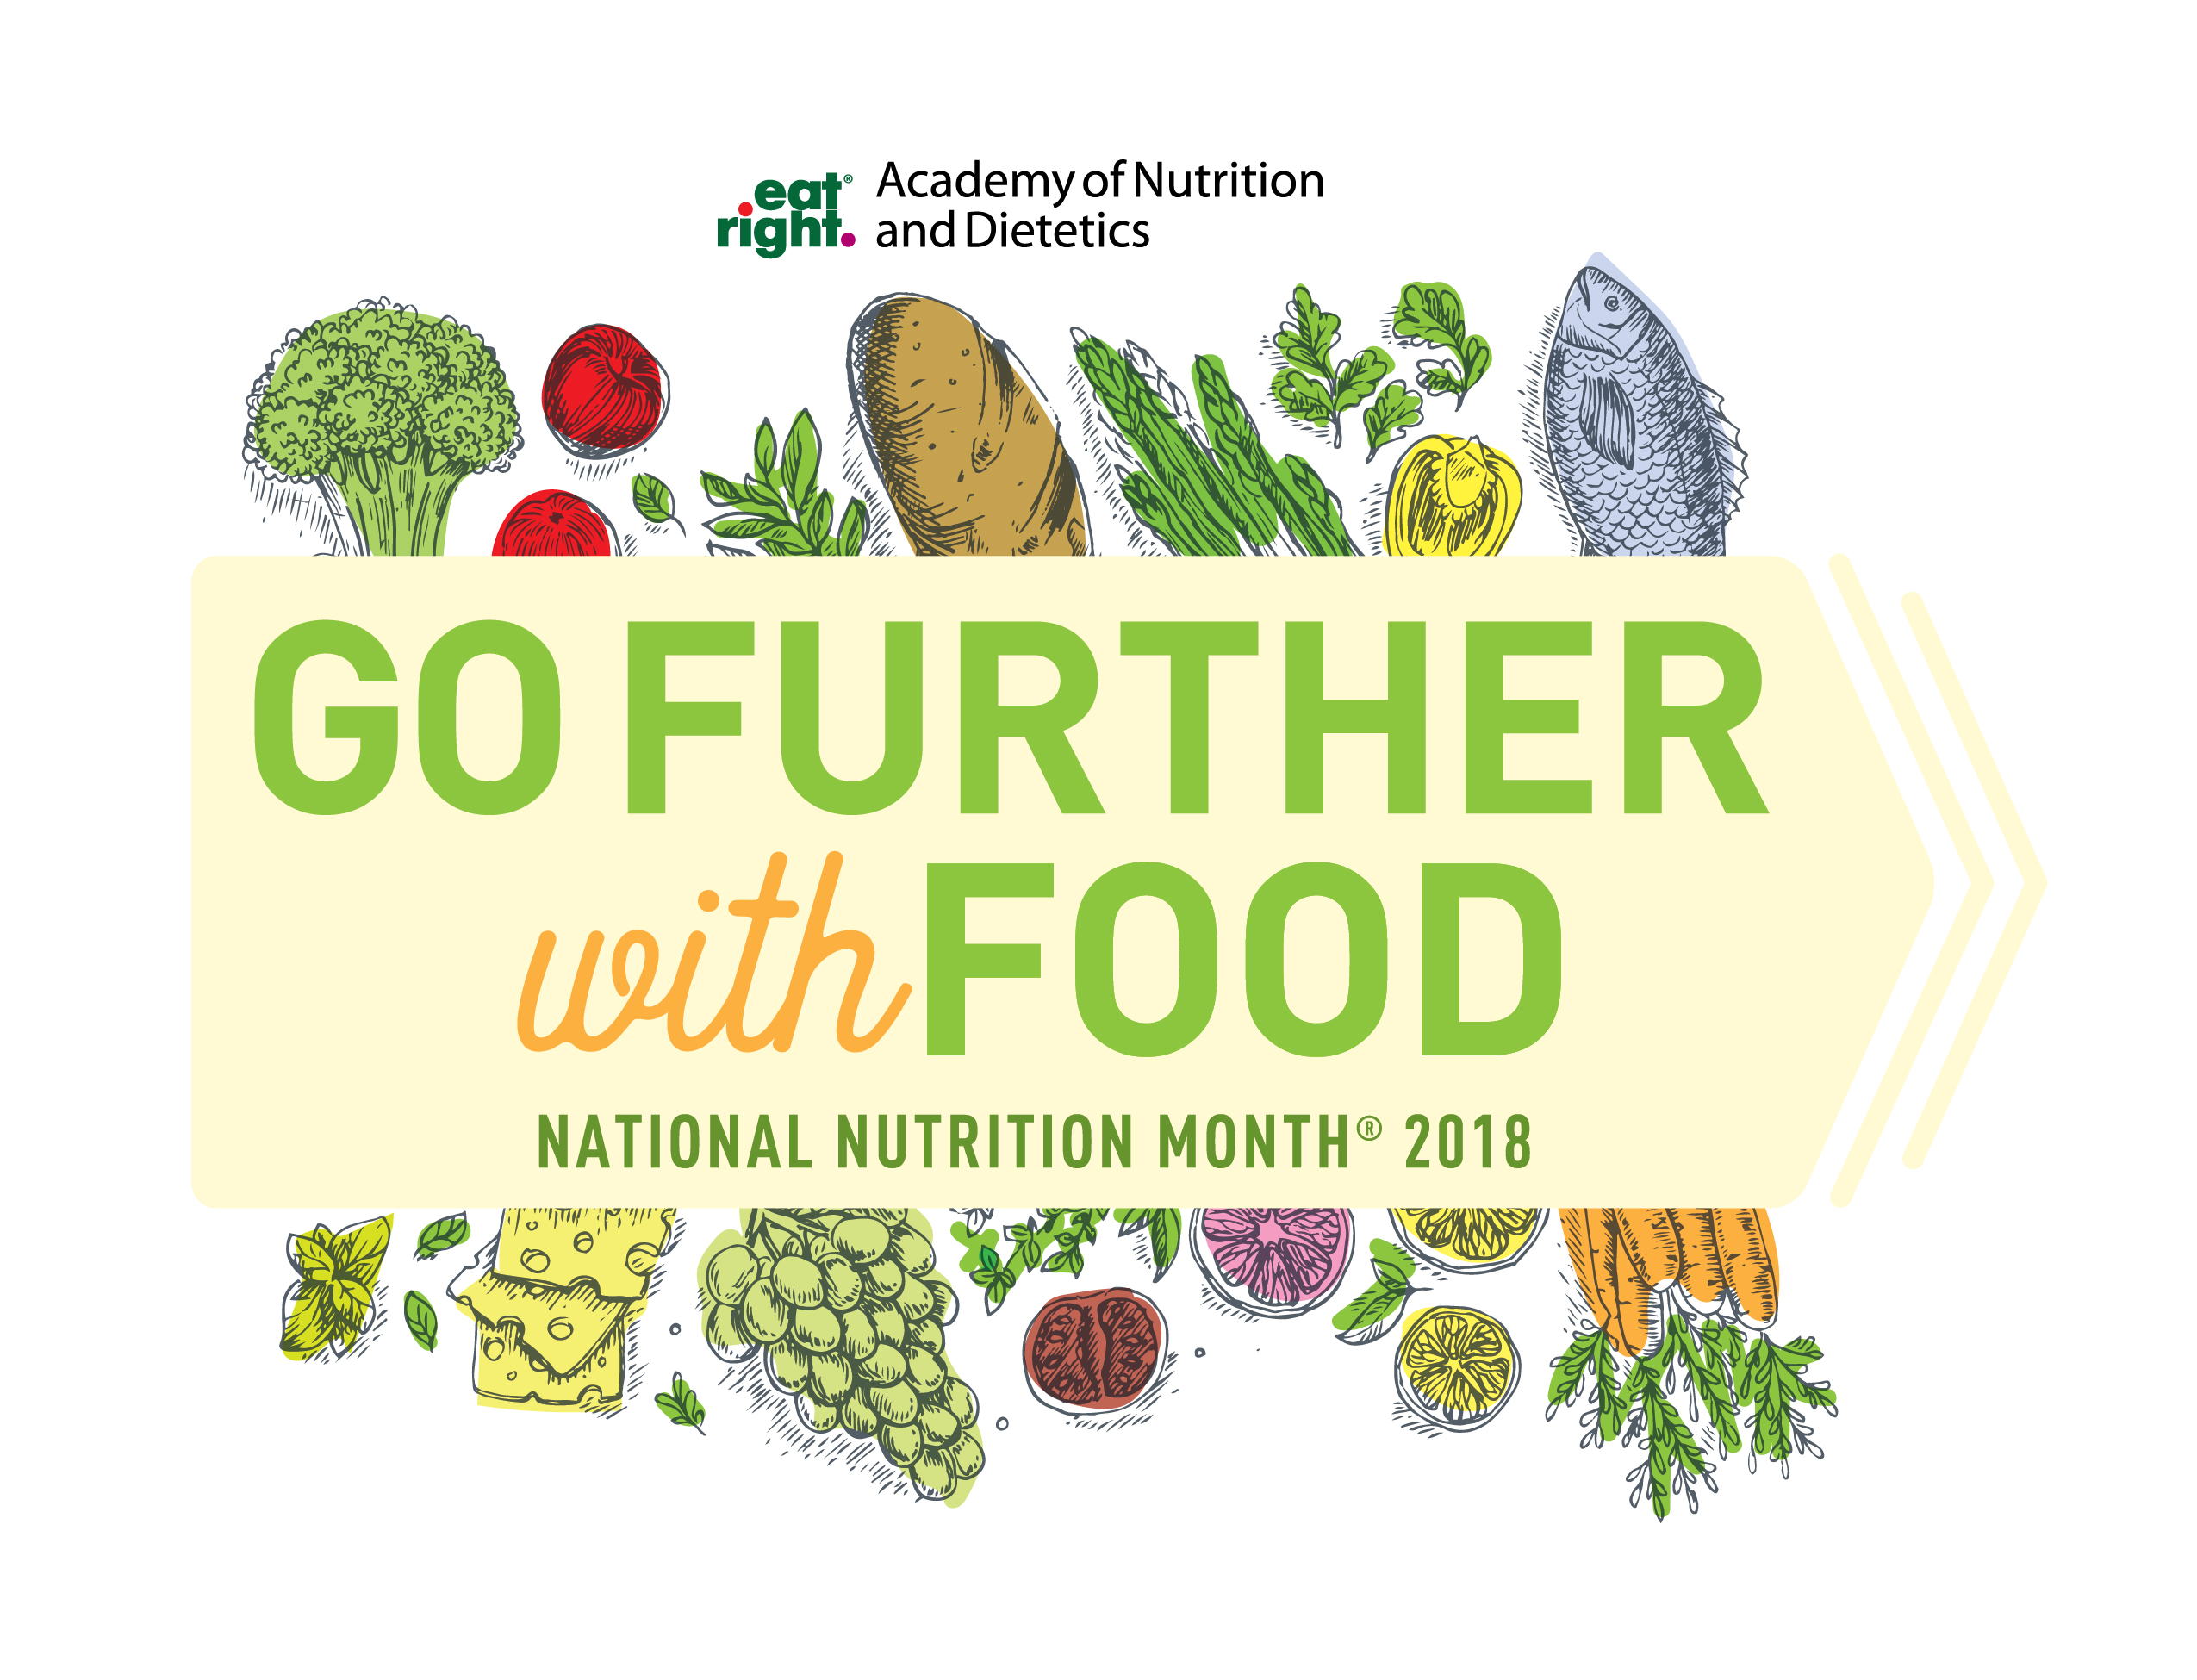 National Nutrition Month®: Go Further with Food!